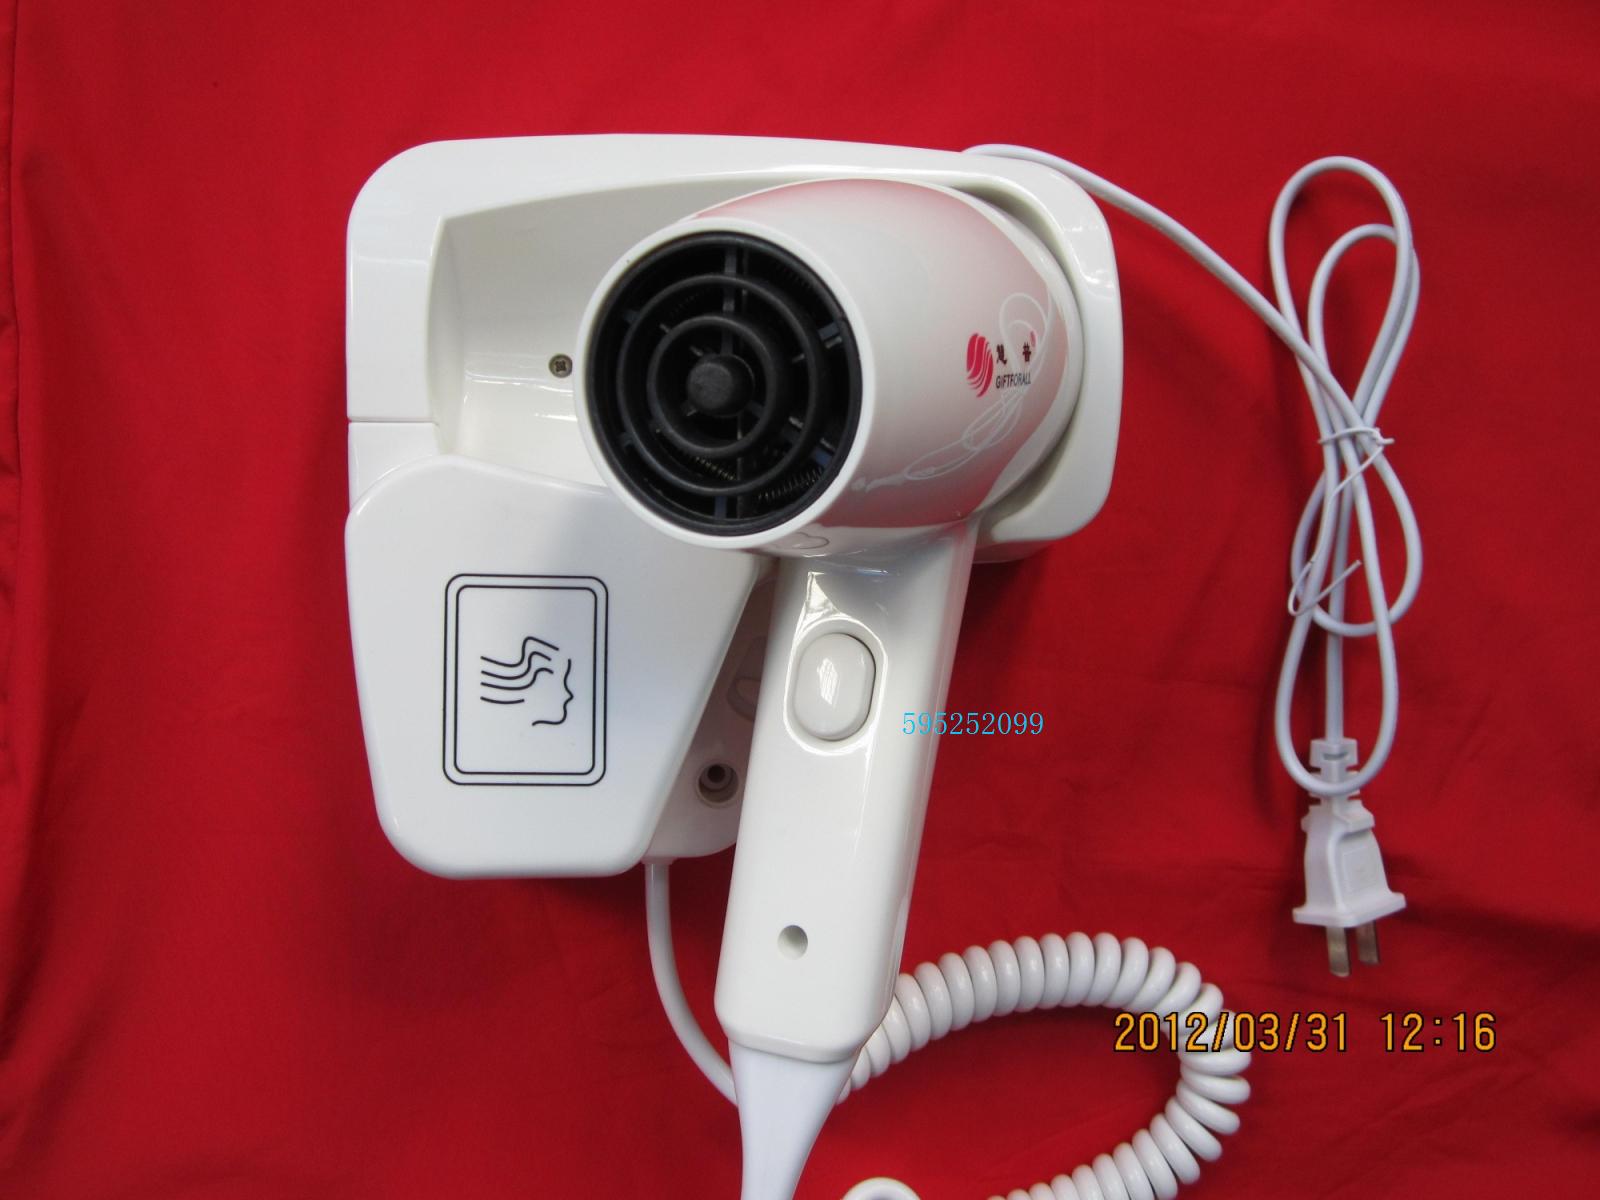 NEW Wholesale And Retail Promotion Hotel And Household Bathroom Hair Dryer Wall-Mounted High Power Hair Dryer Wall